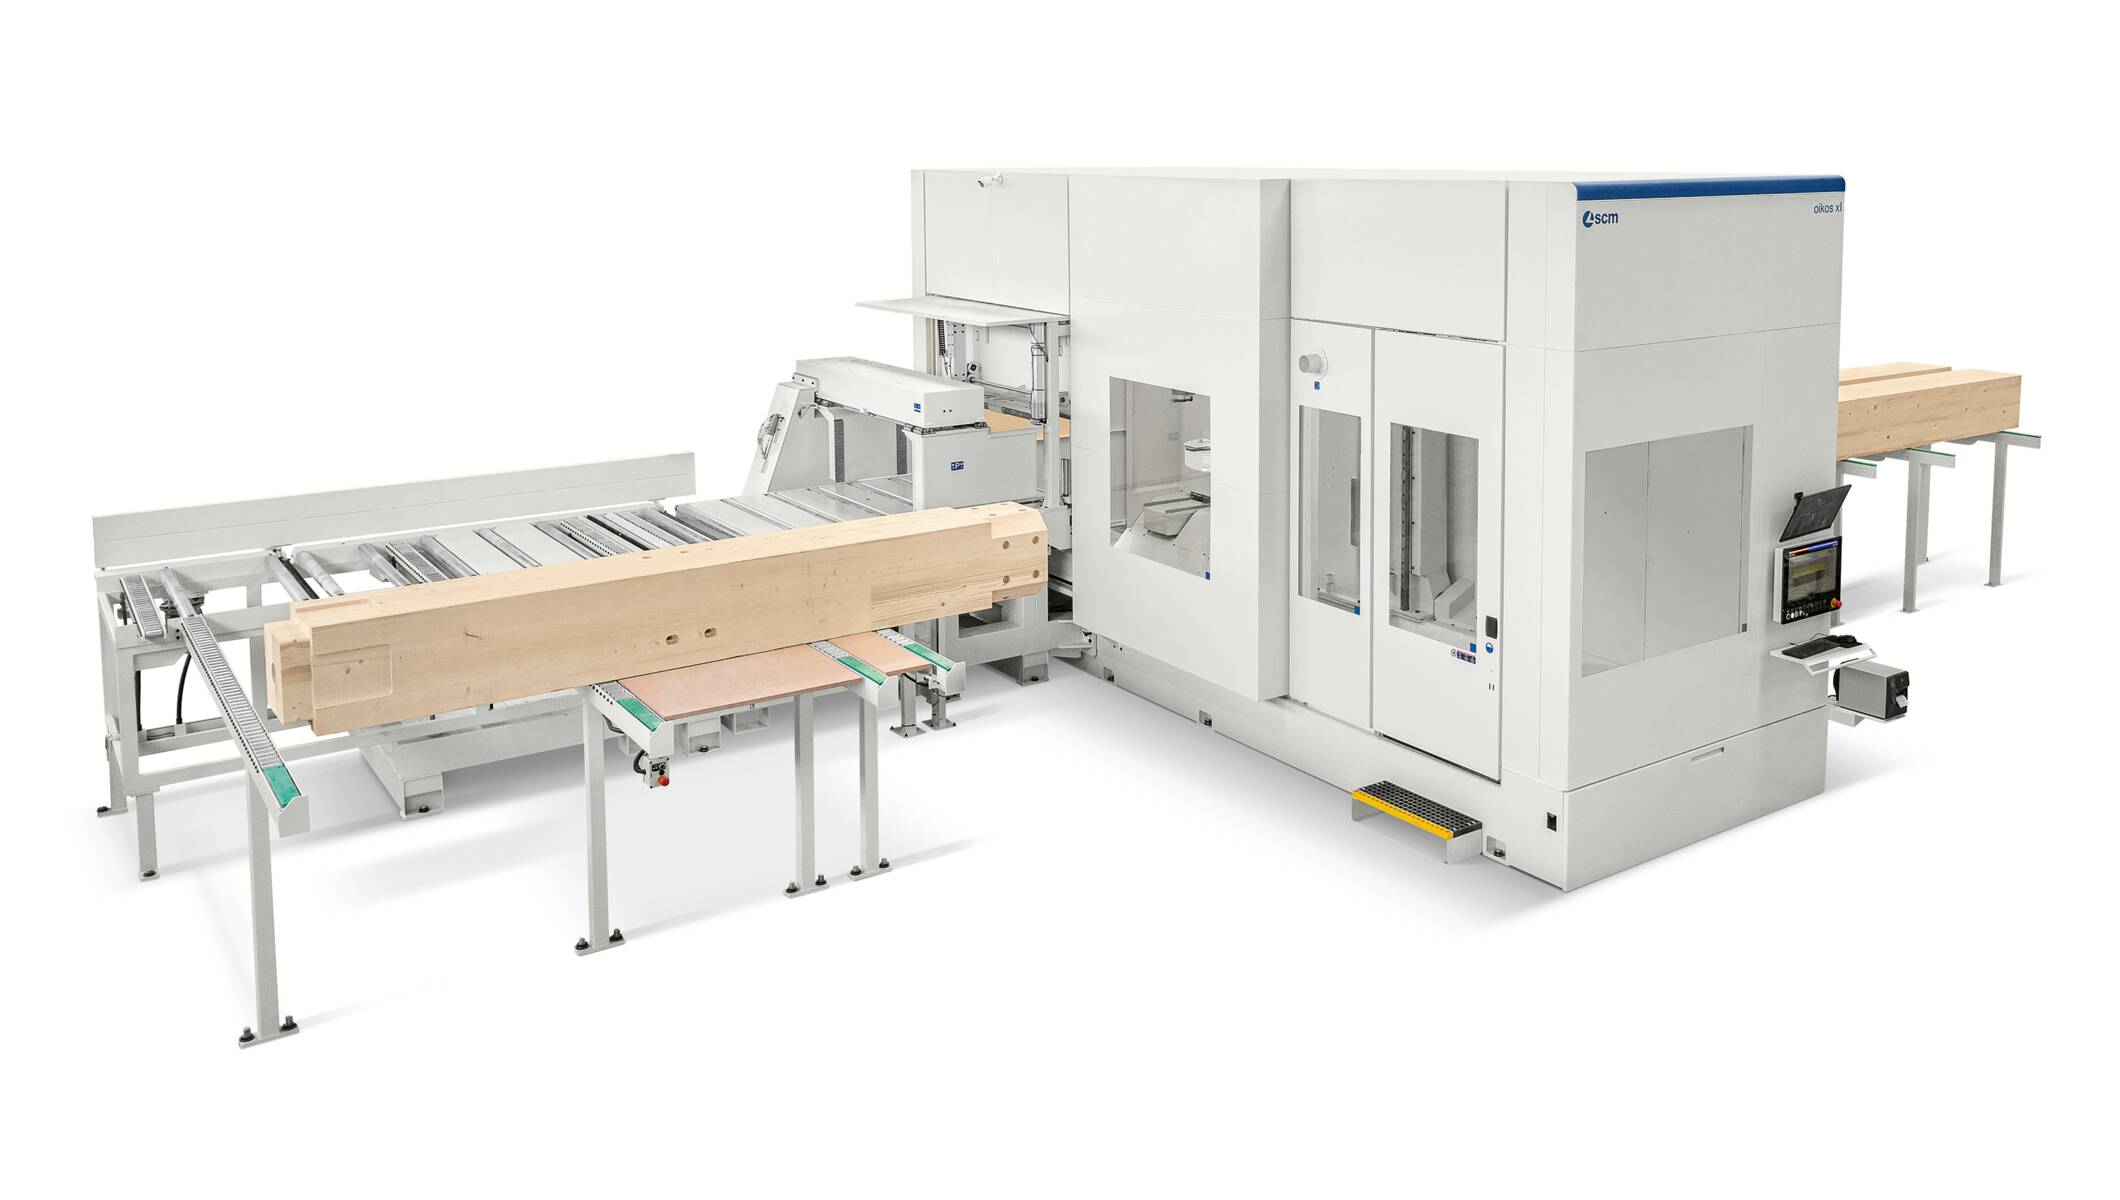 Systems for timber construction - CNC Machining Centres for timber construction - oikos xl